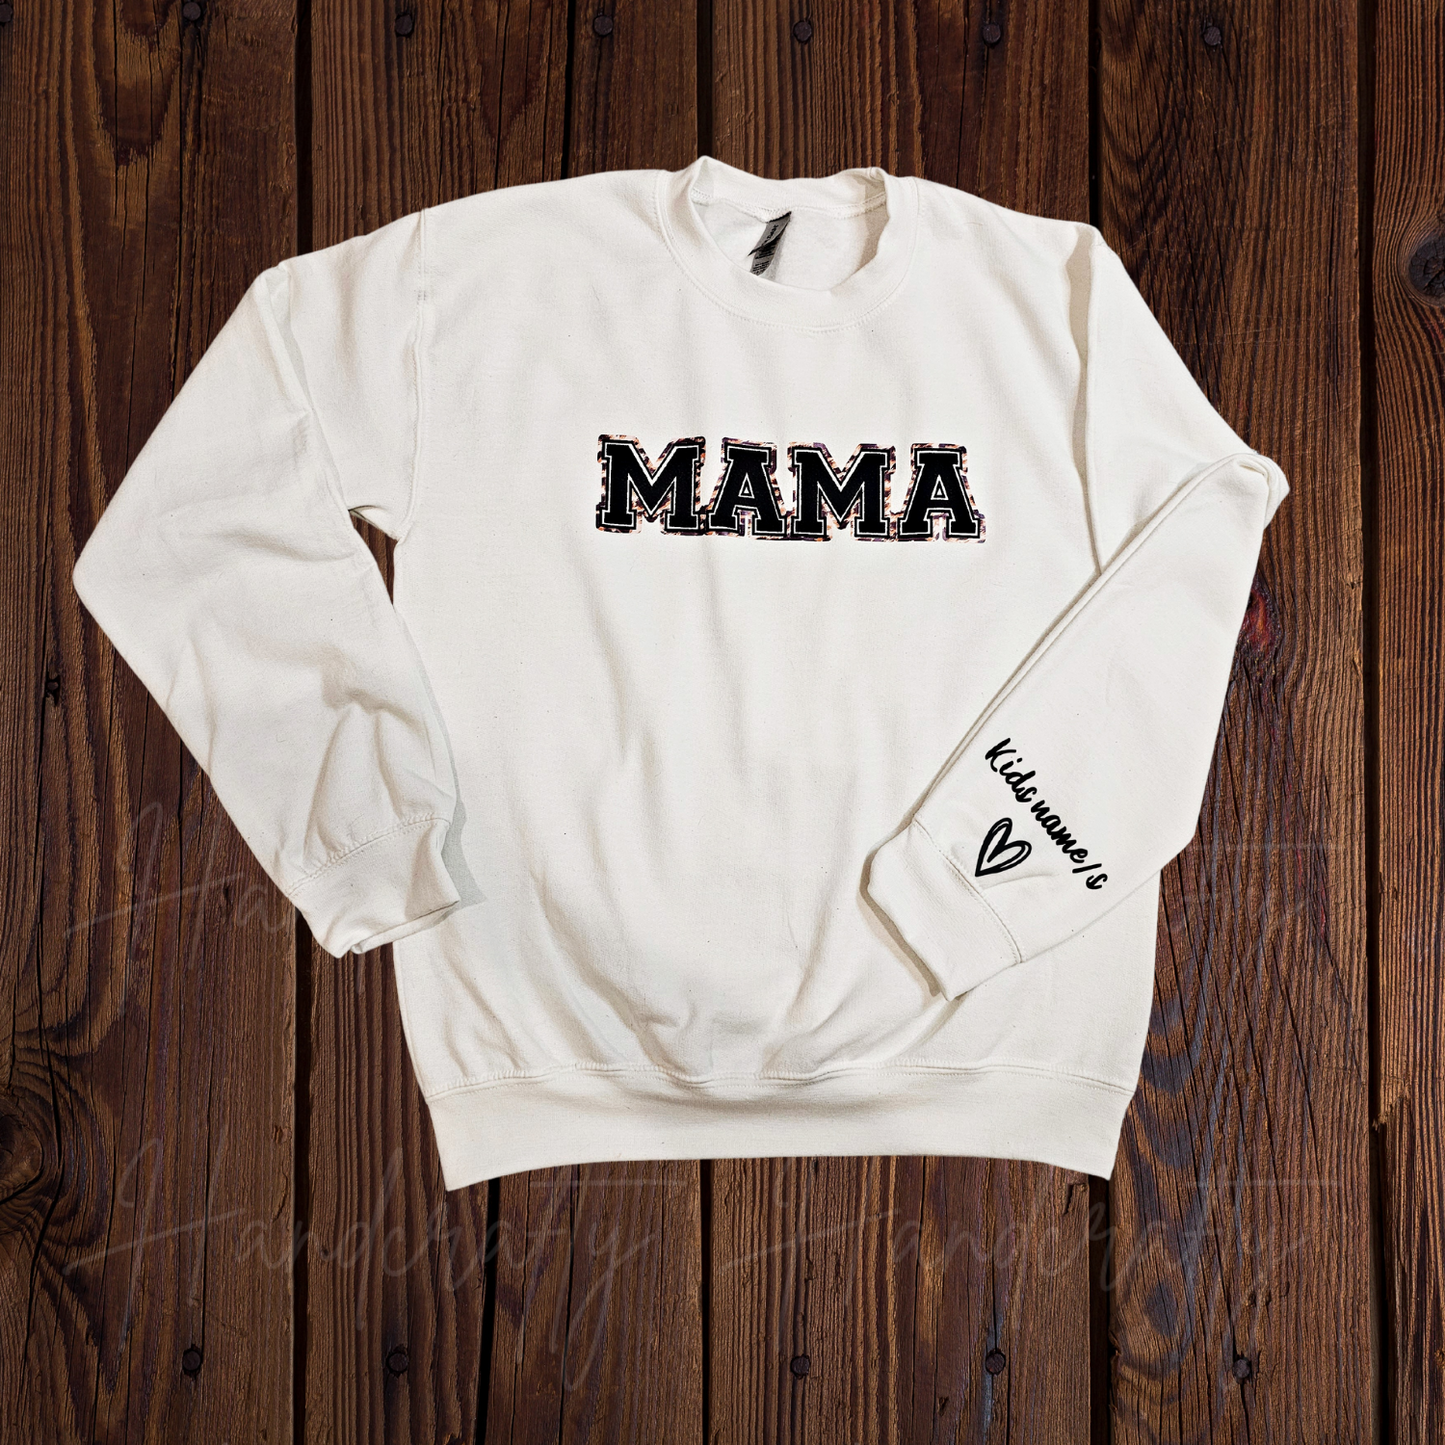 Personalized MOM sweatshirt  with name sleeves, Personalized MAMA Sweatshirt with name sleeves, GIGI sweatshirt with name sleeves, AUNTIE sweatshirt with name sleeves, GRANDMA sweatshirt with name sleeves,  MOM fleece  with name sleeves,  MAMA fleece with name sleeves, GIGI fleece with name sleeves, AUNTIE fleece with name sleeves, GRANDMA fleece with name sleeves.